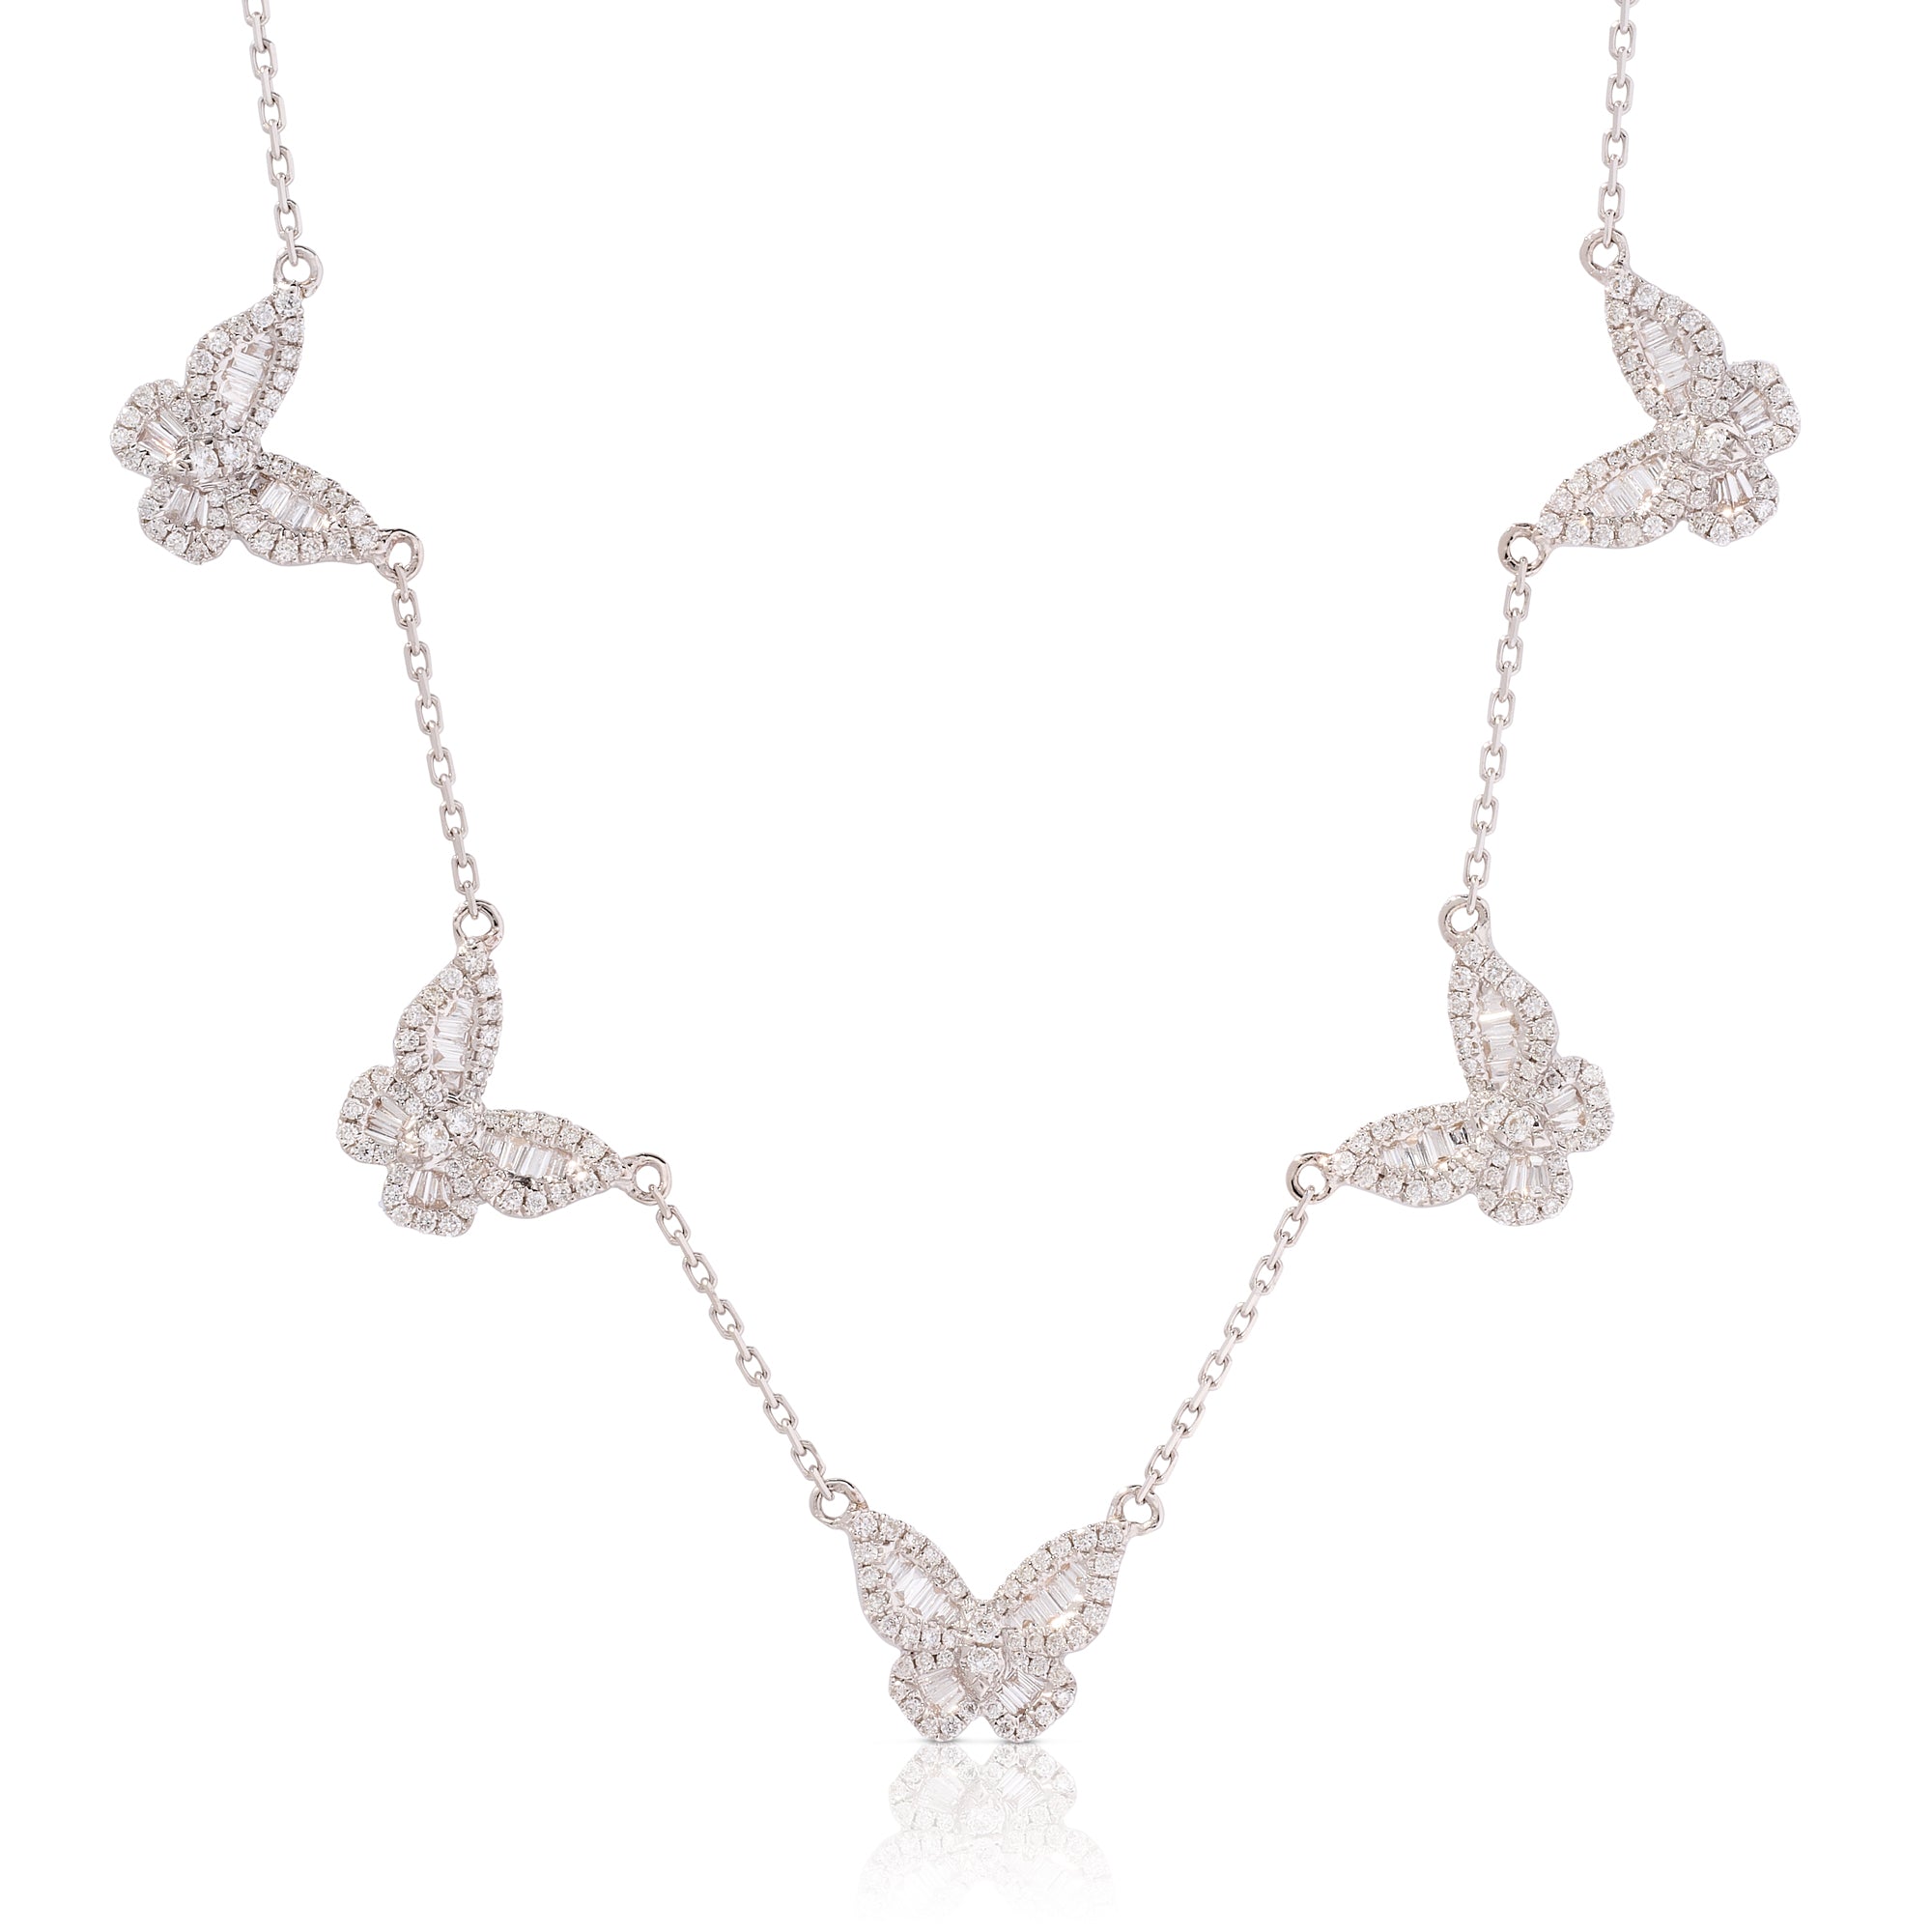 Butterfly Necklace With Diamonds - 001-911-13000390